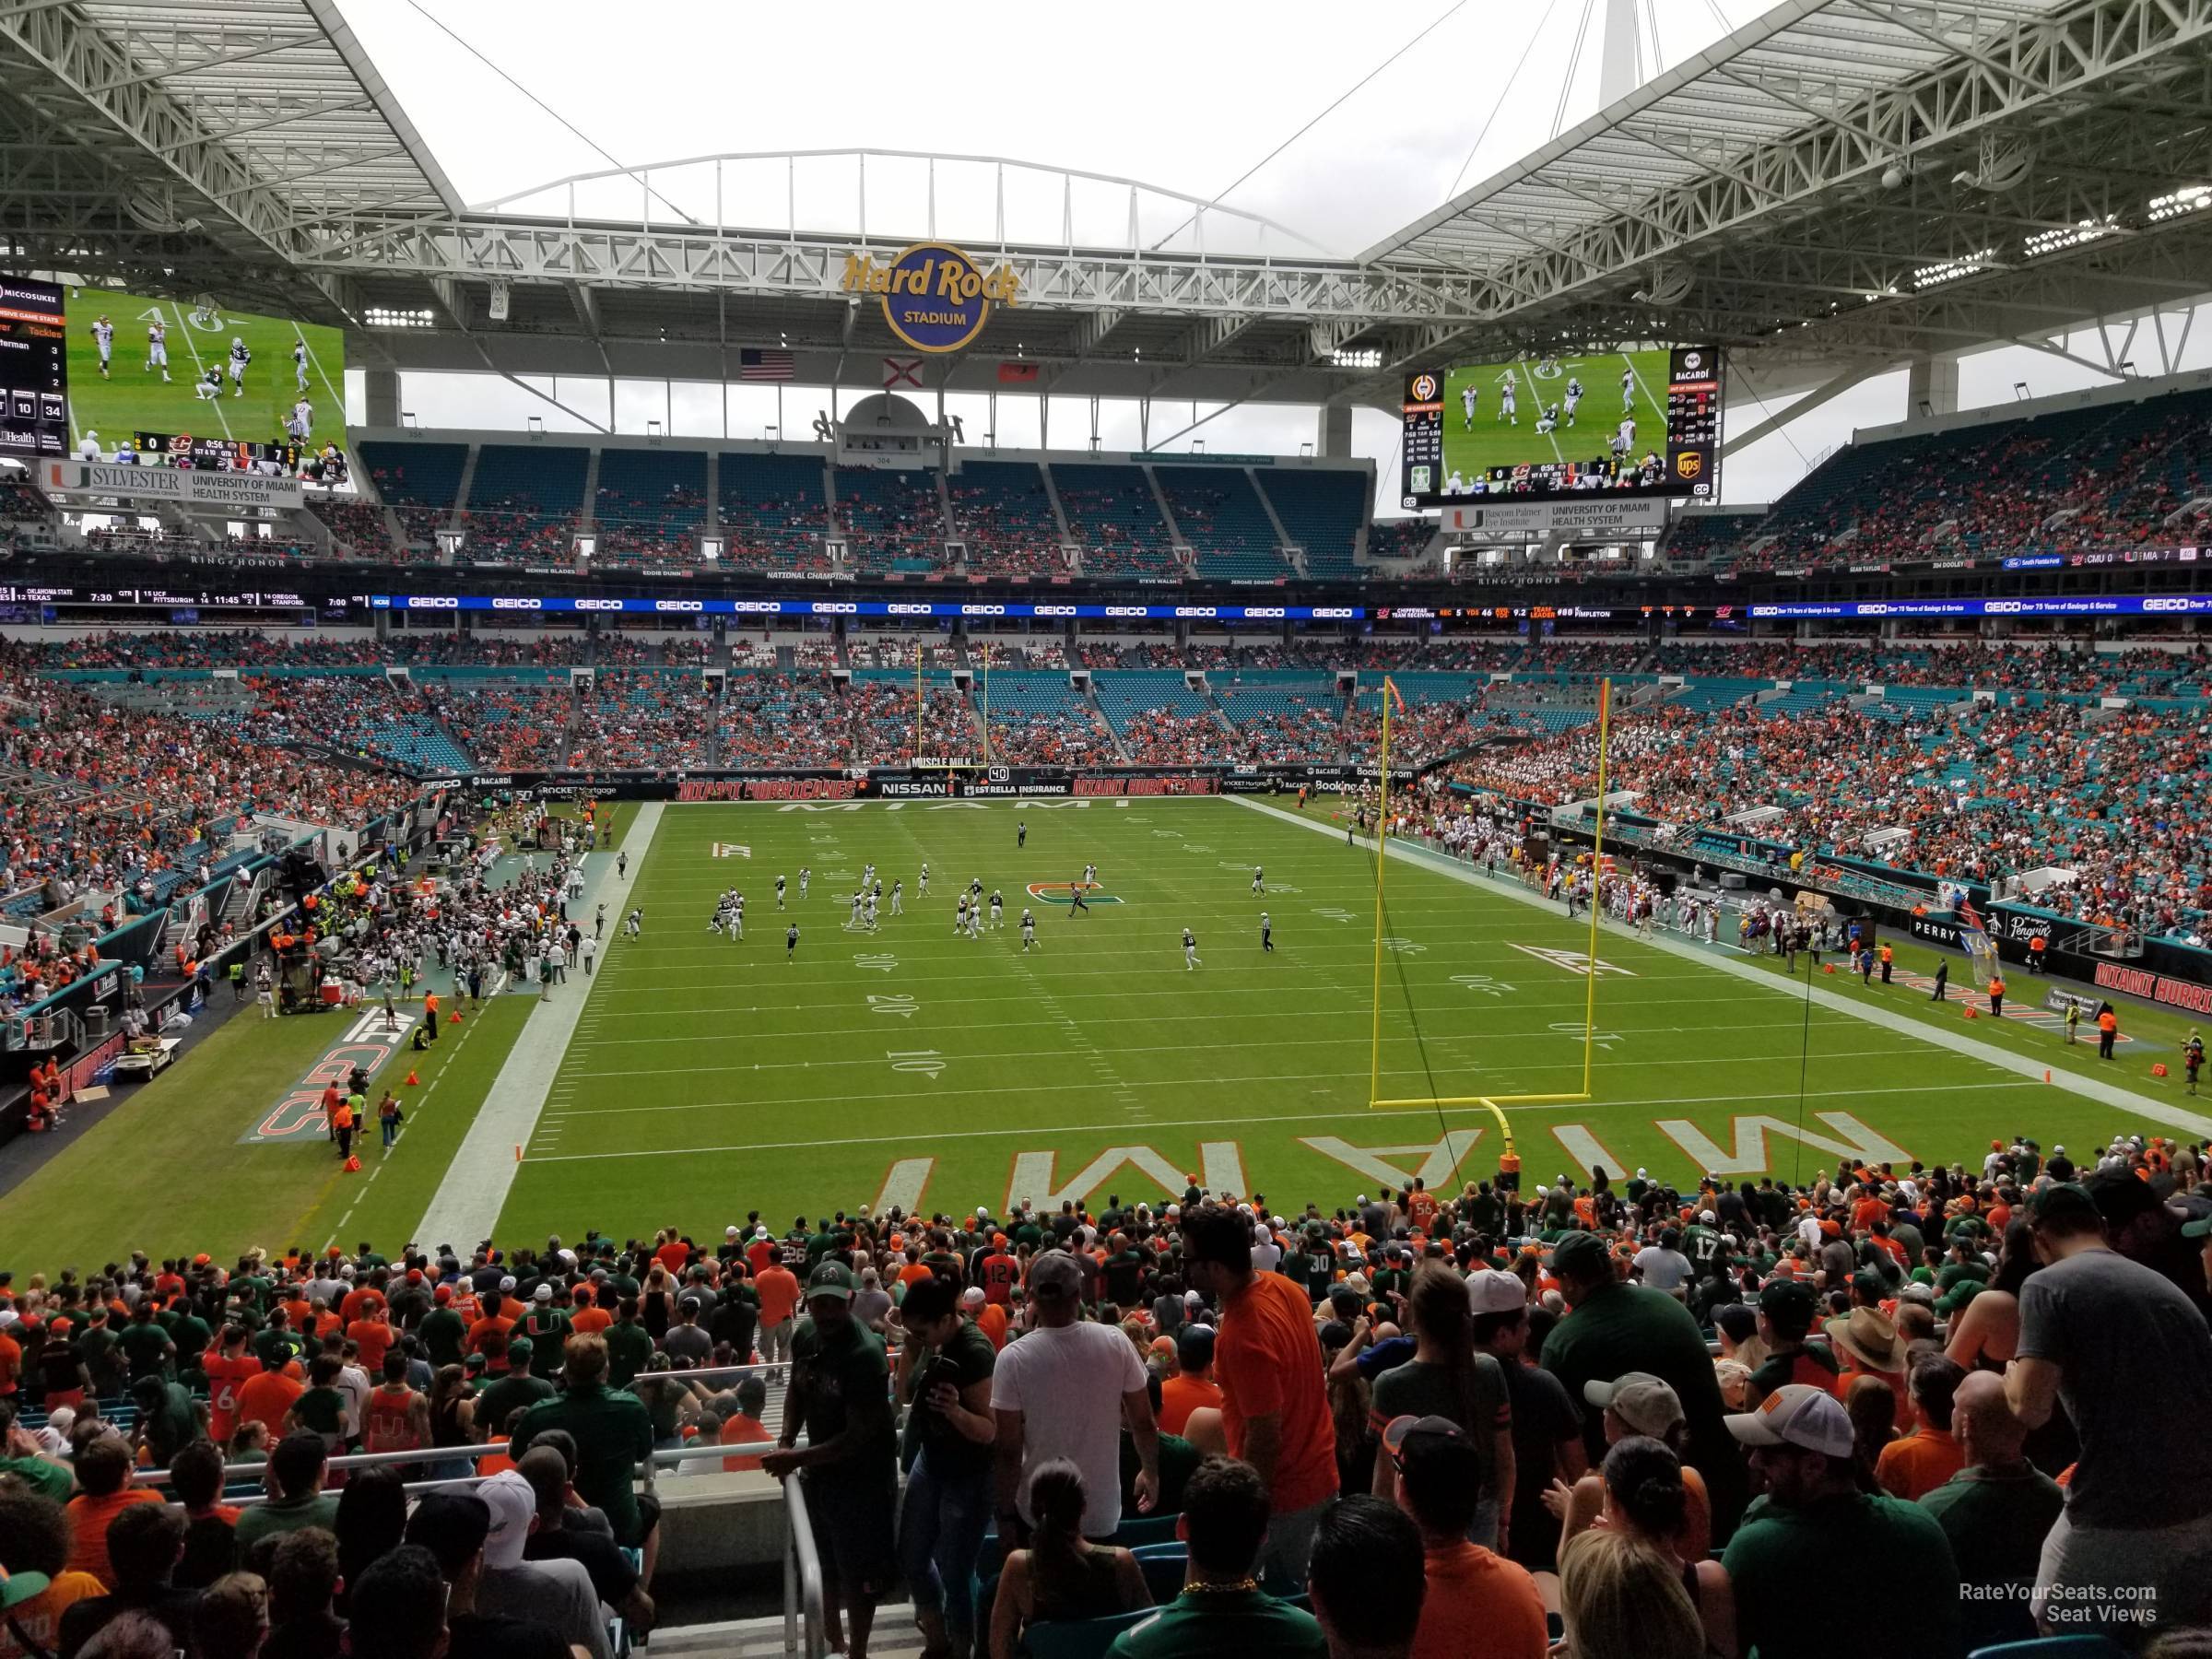 section 234, row 10 seat view  for football - hard rock stadium